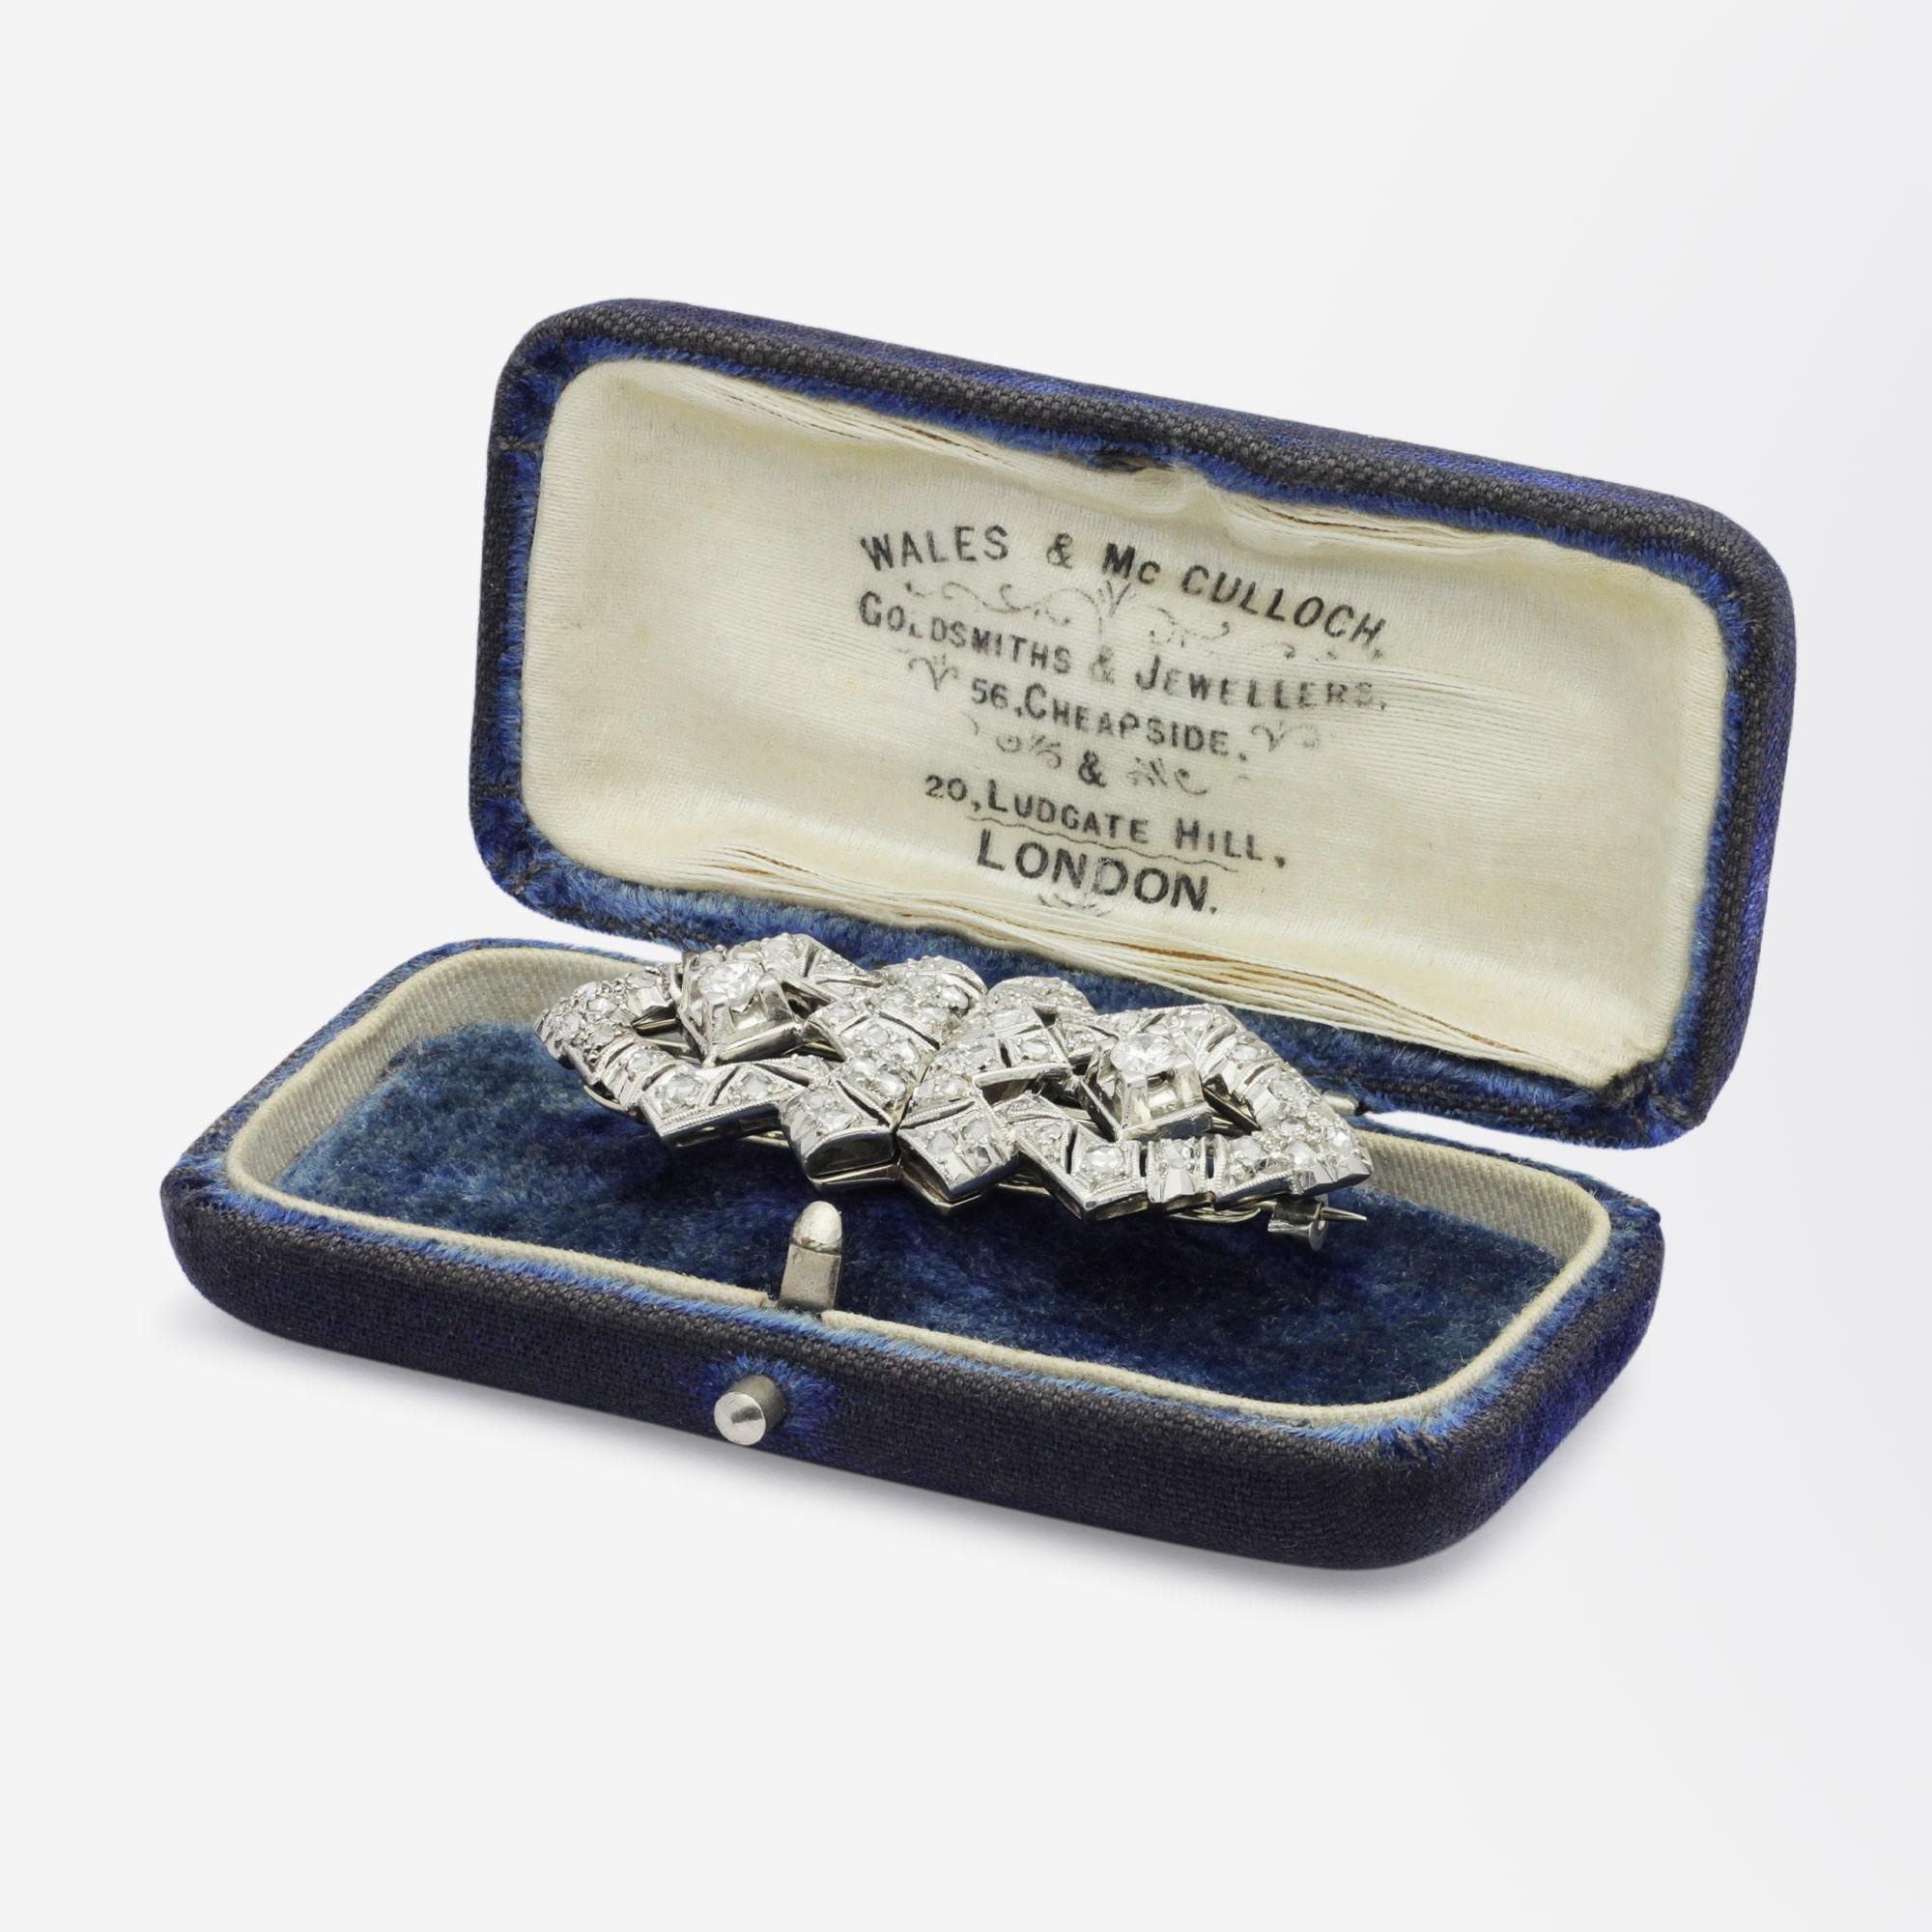 A beautiful Art Deco period platinum and diamond brooch by Argentinian maker, Walser Wald. The handmade platinum brooch separates off the frame it is presented on and becomes two identical dress pins, sometimes known as 'collar clips'. The two clips